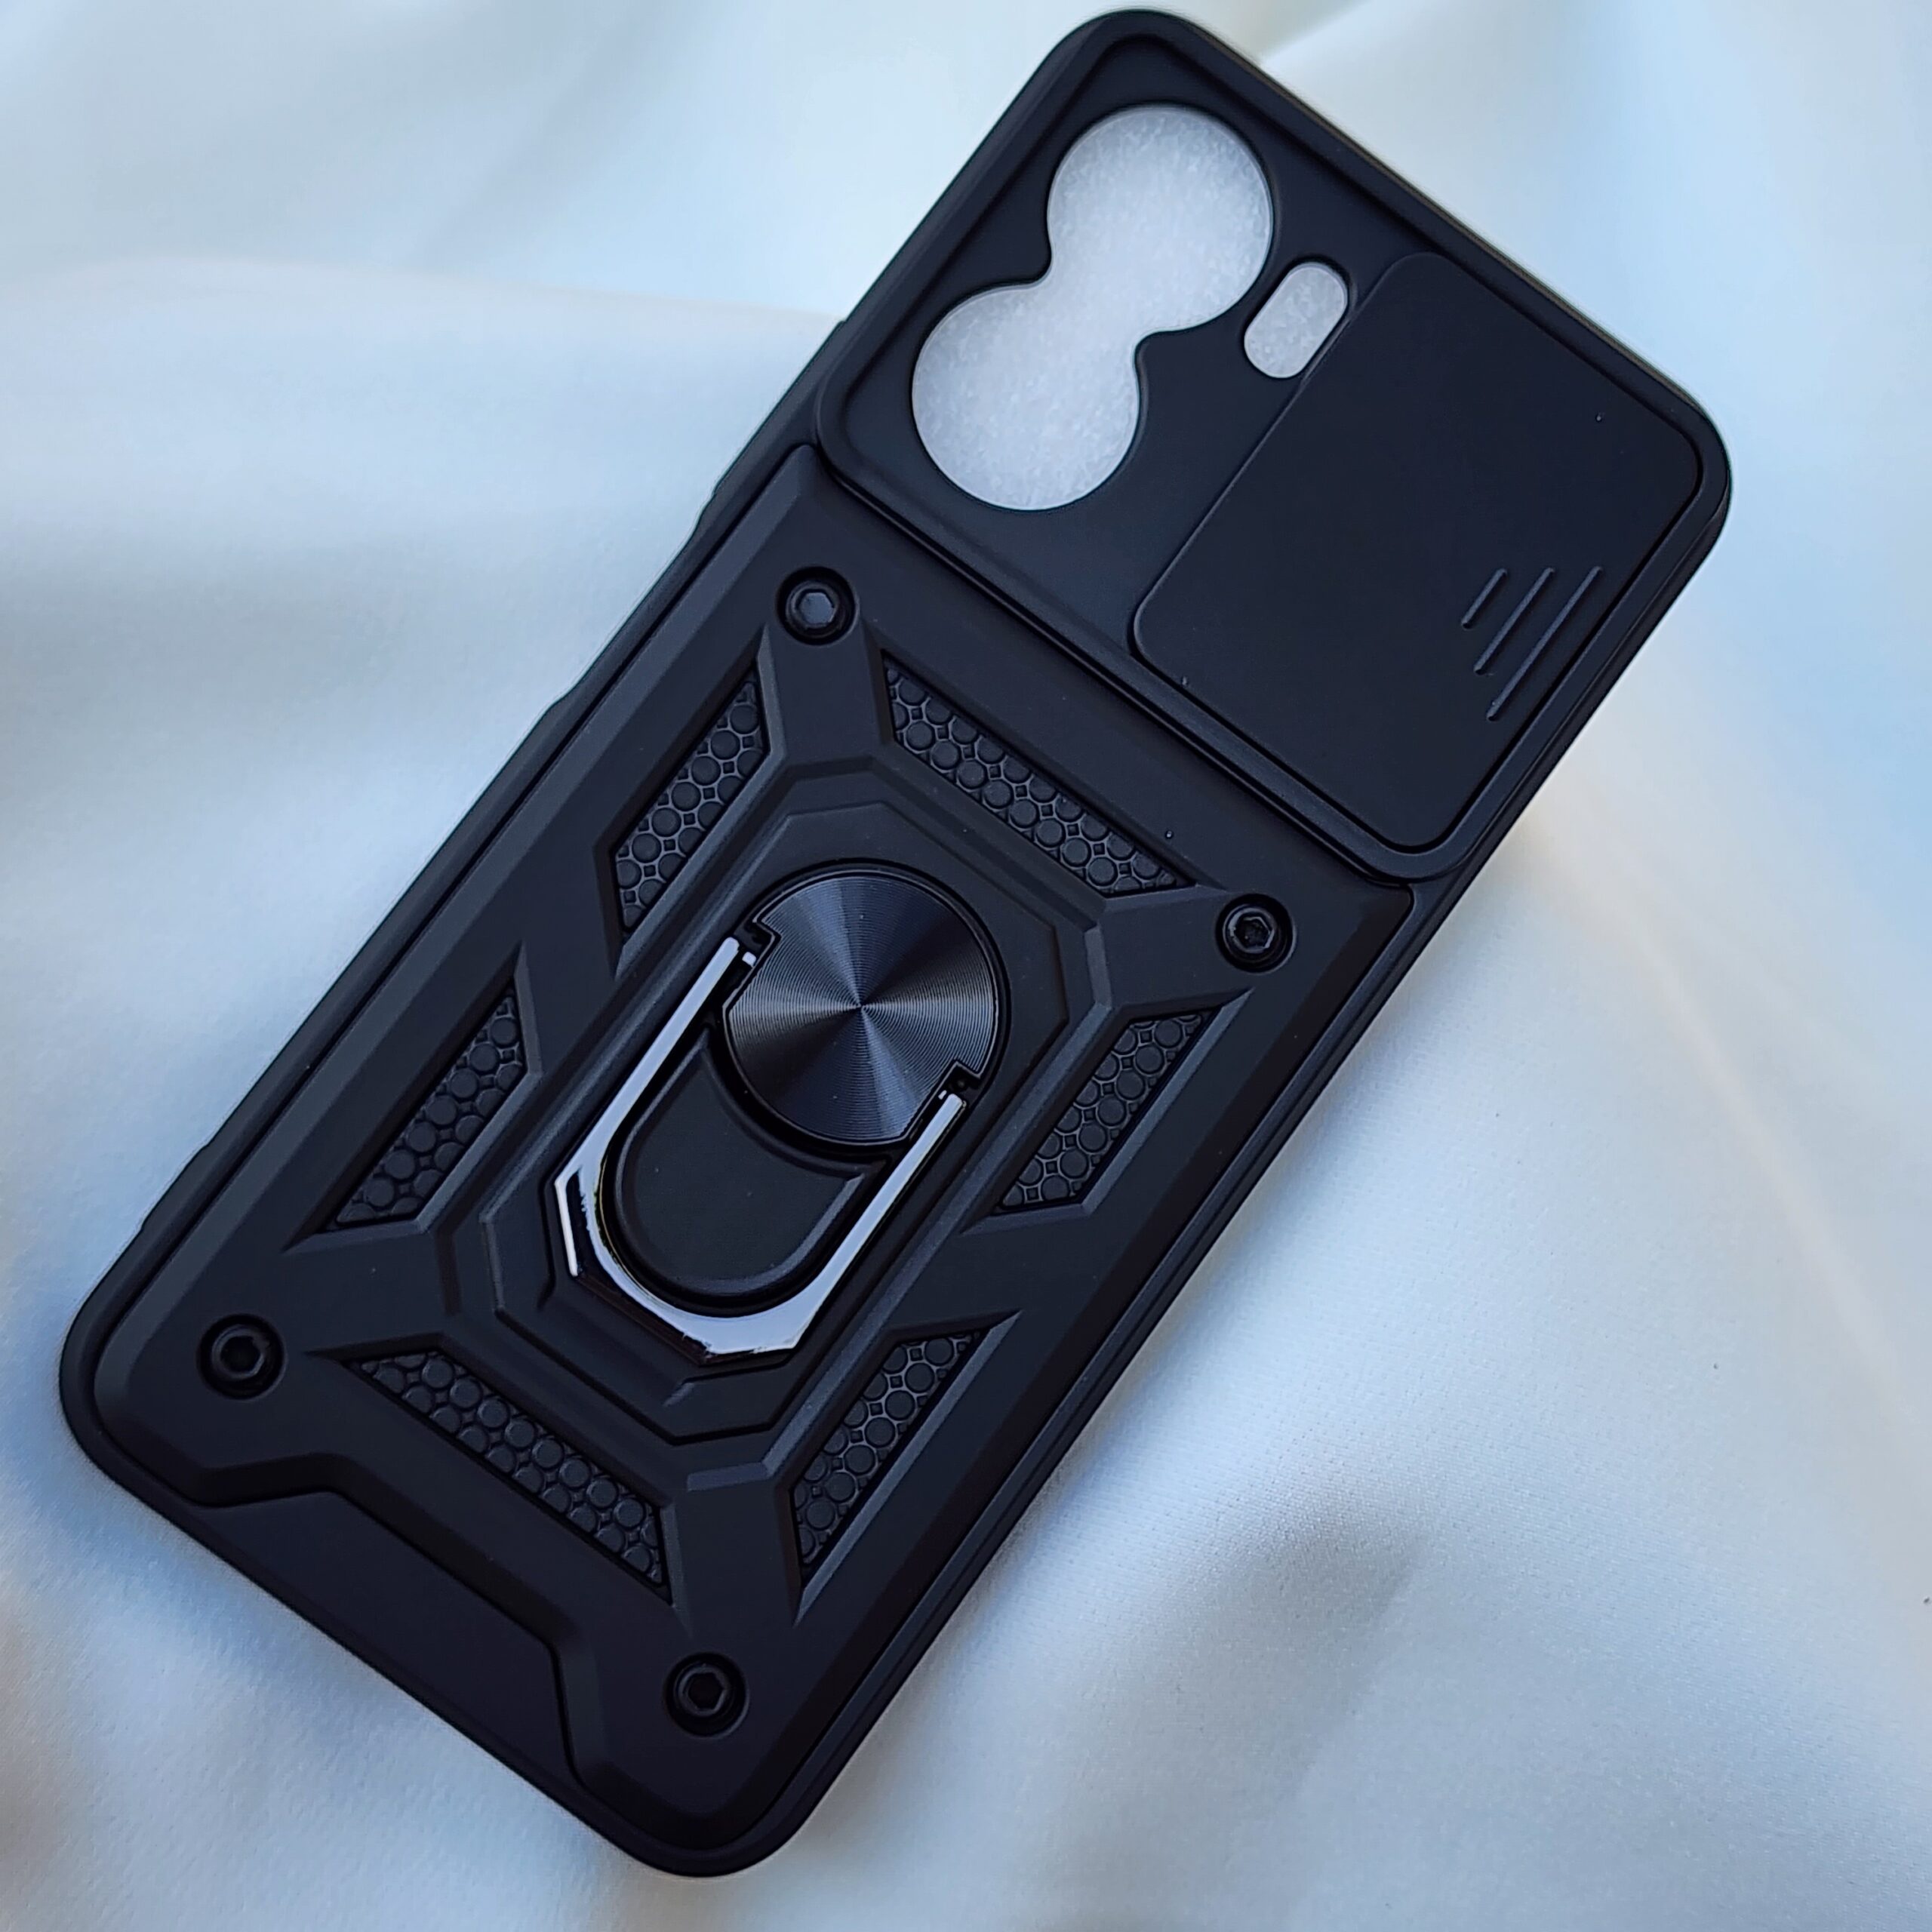 Vivo T2 5G UAG Back Cover with camera protection – BT Limited Edition Store